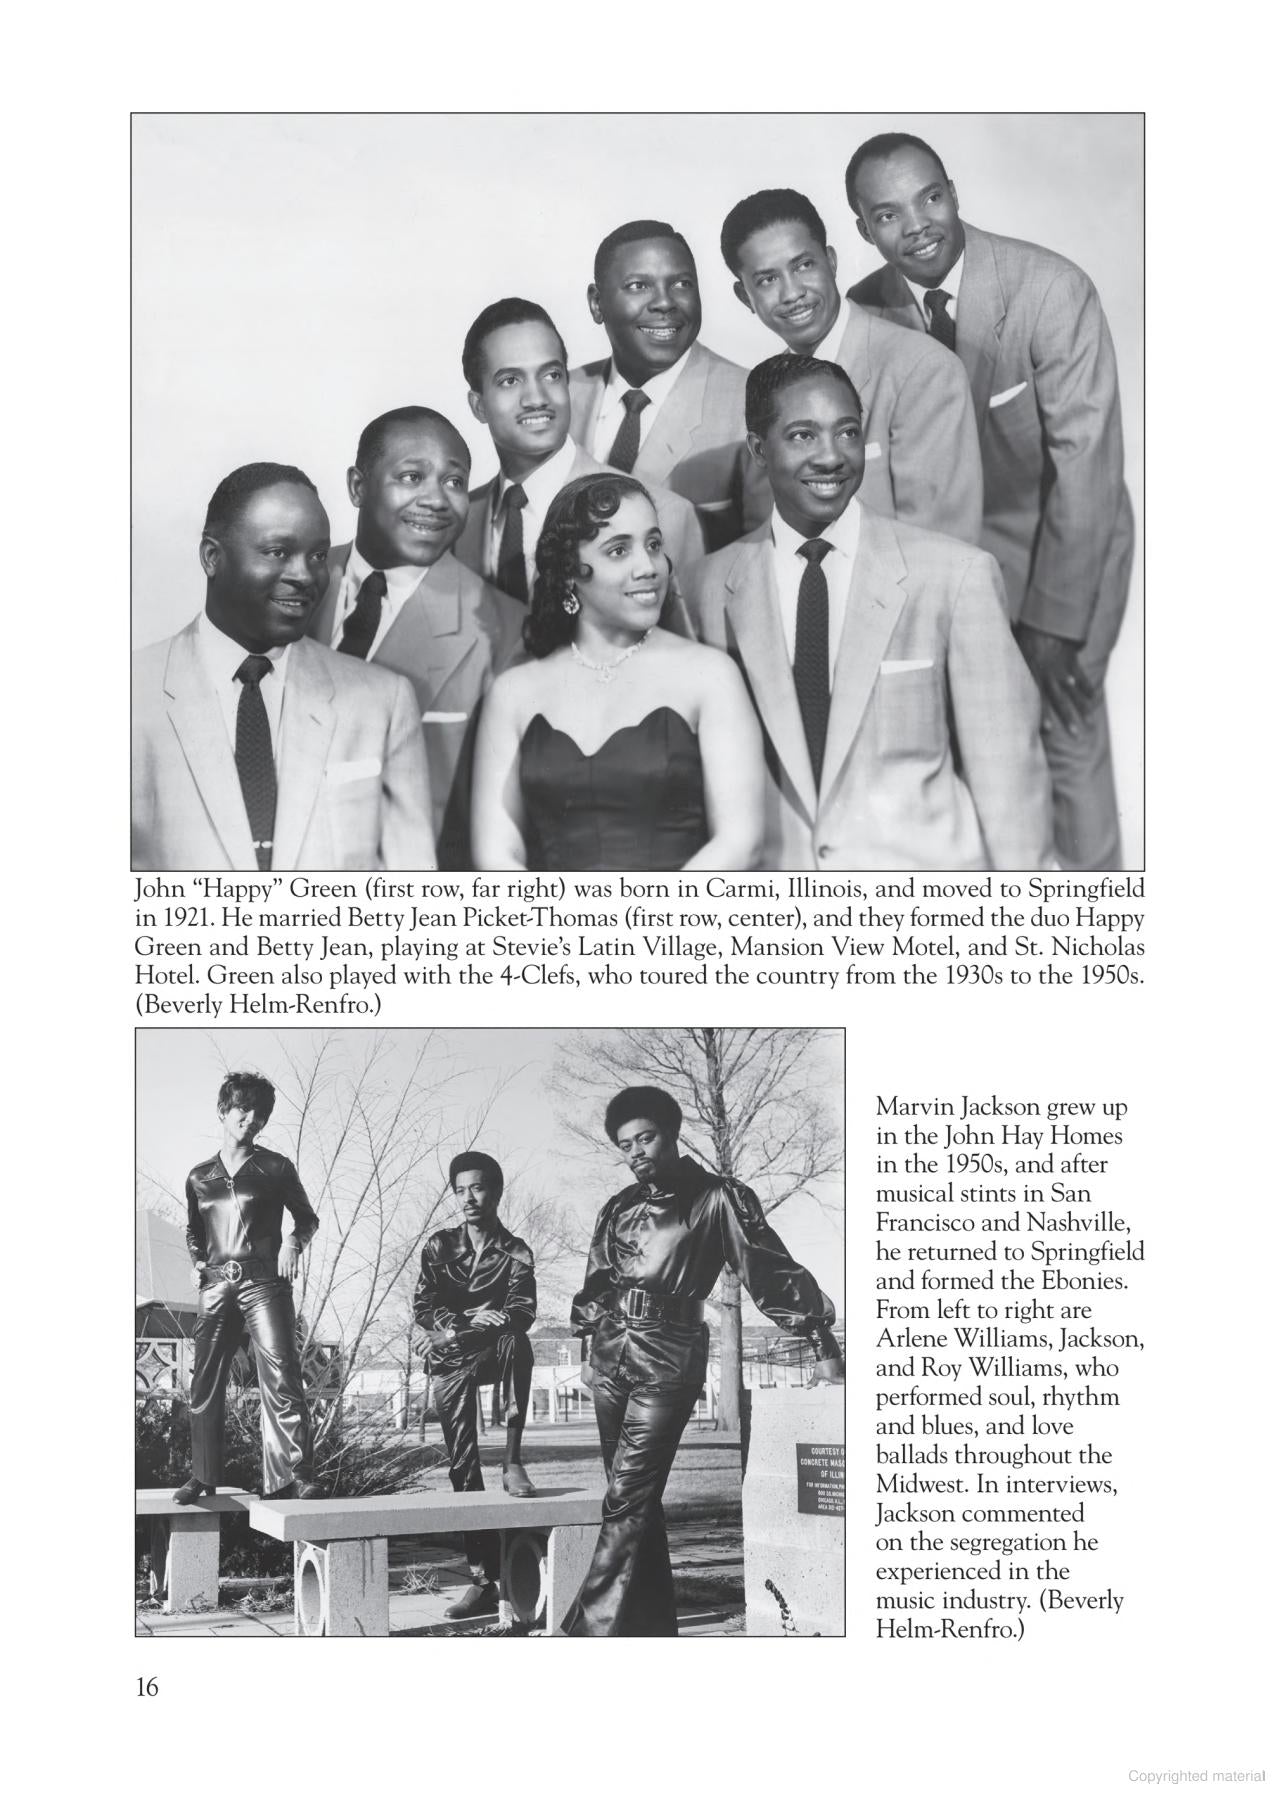 Page 16, a sample page from the book “African Americans in Springfield”.